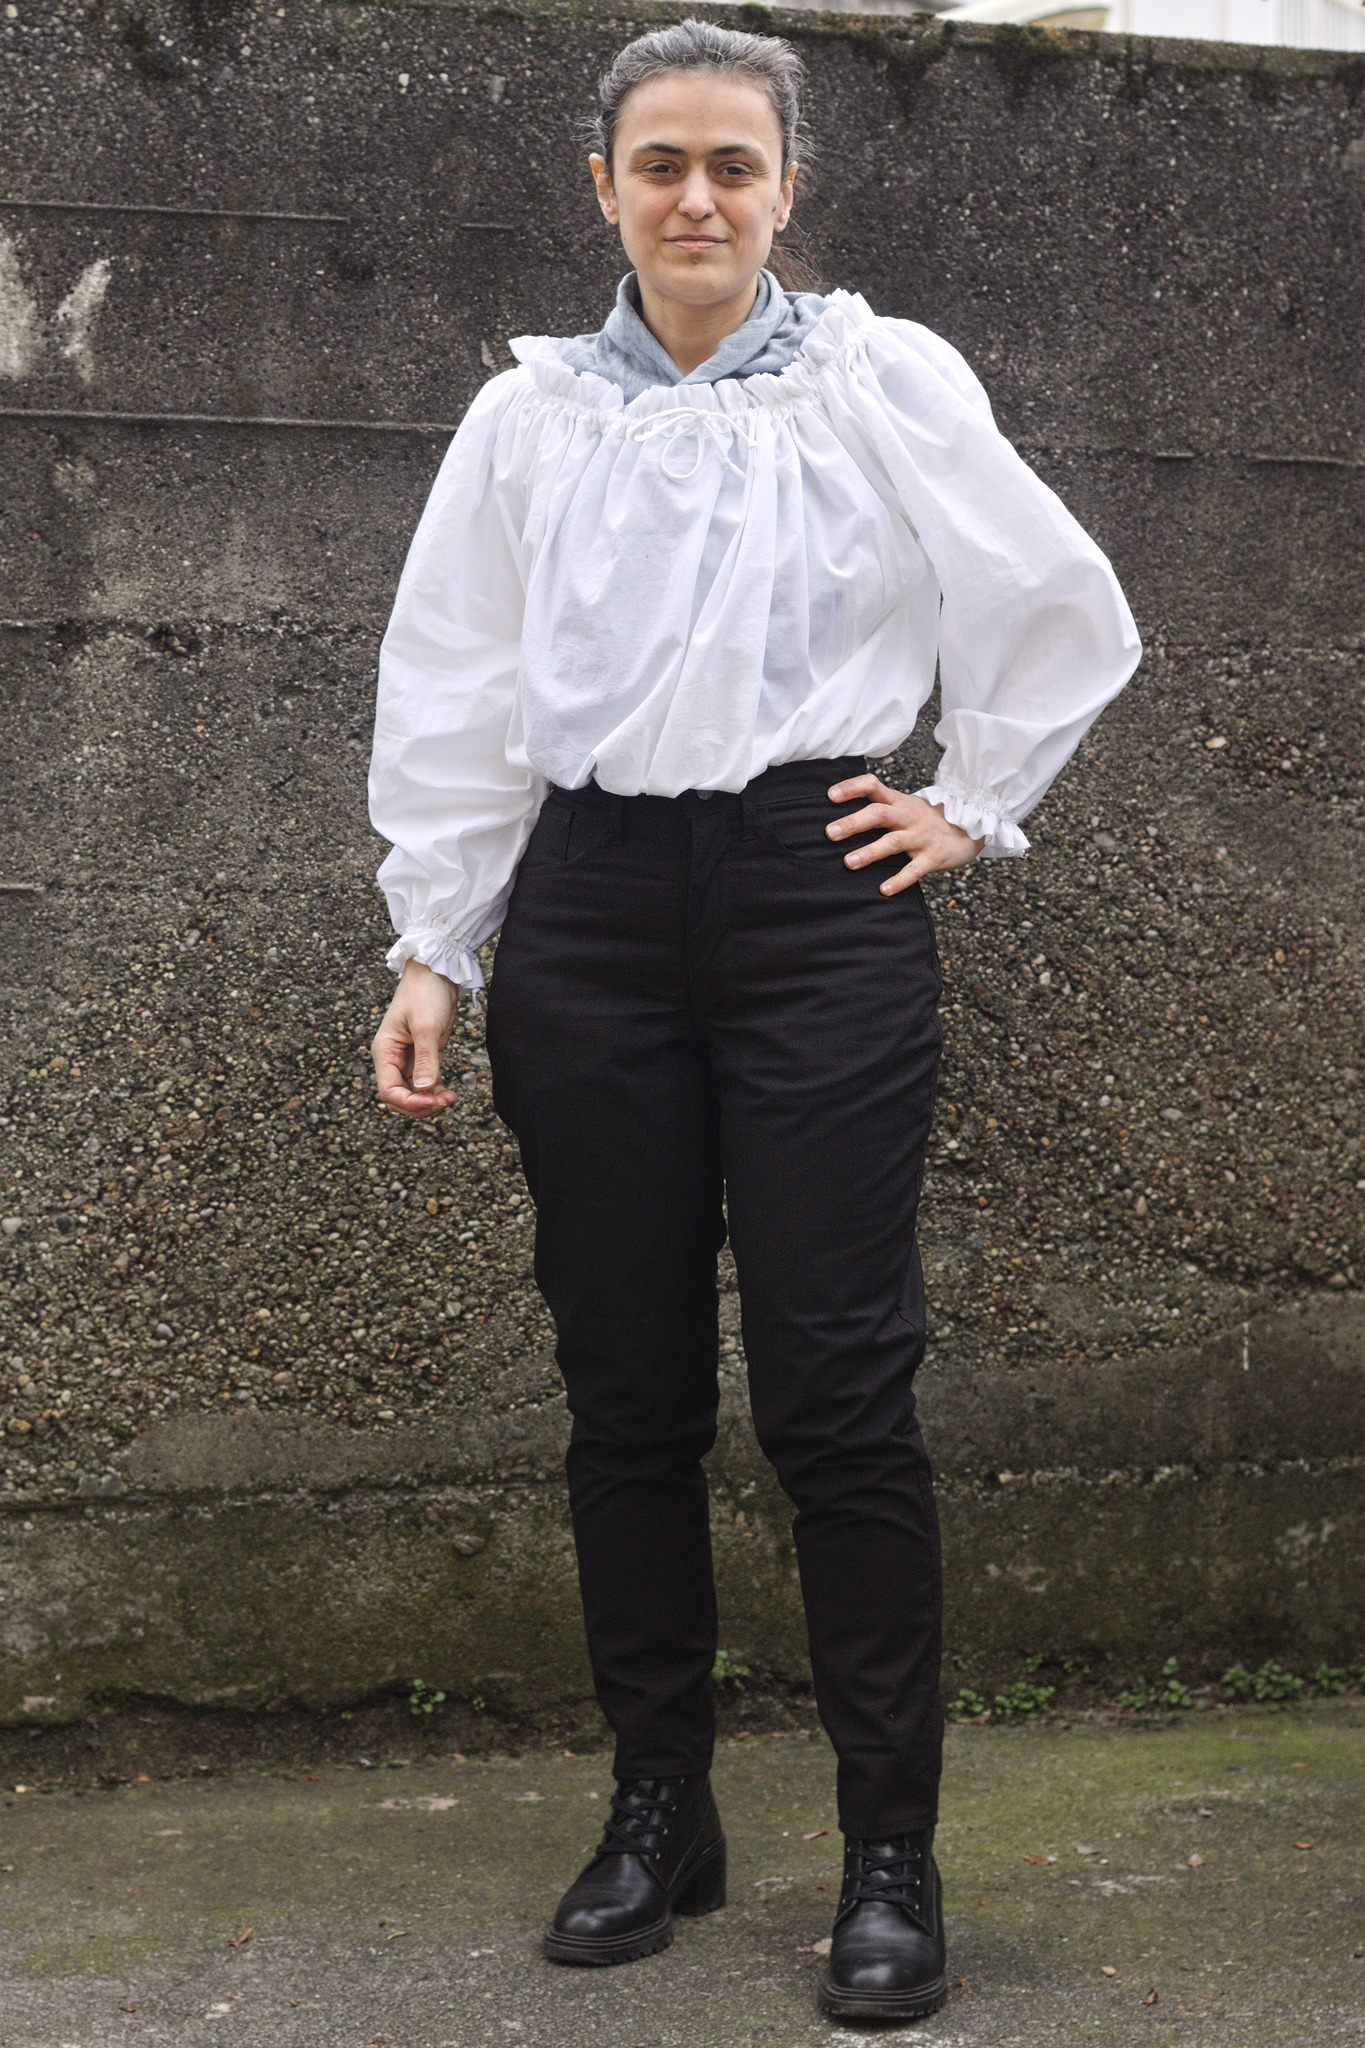 A woman wearing a white top with a wide neck with ruffles and puffy sleeves that are gathered at the cuff. The top is tucked in the trousers to gather the fullness at the waist.